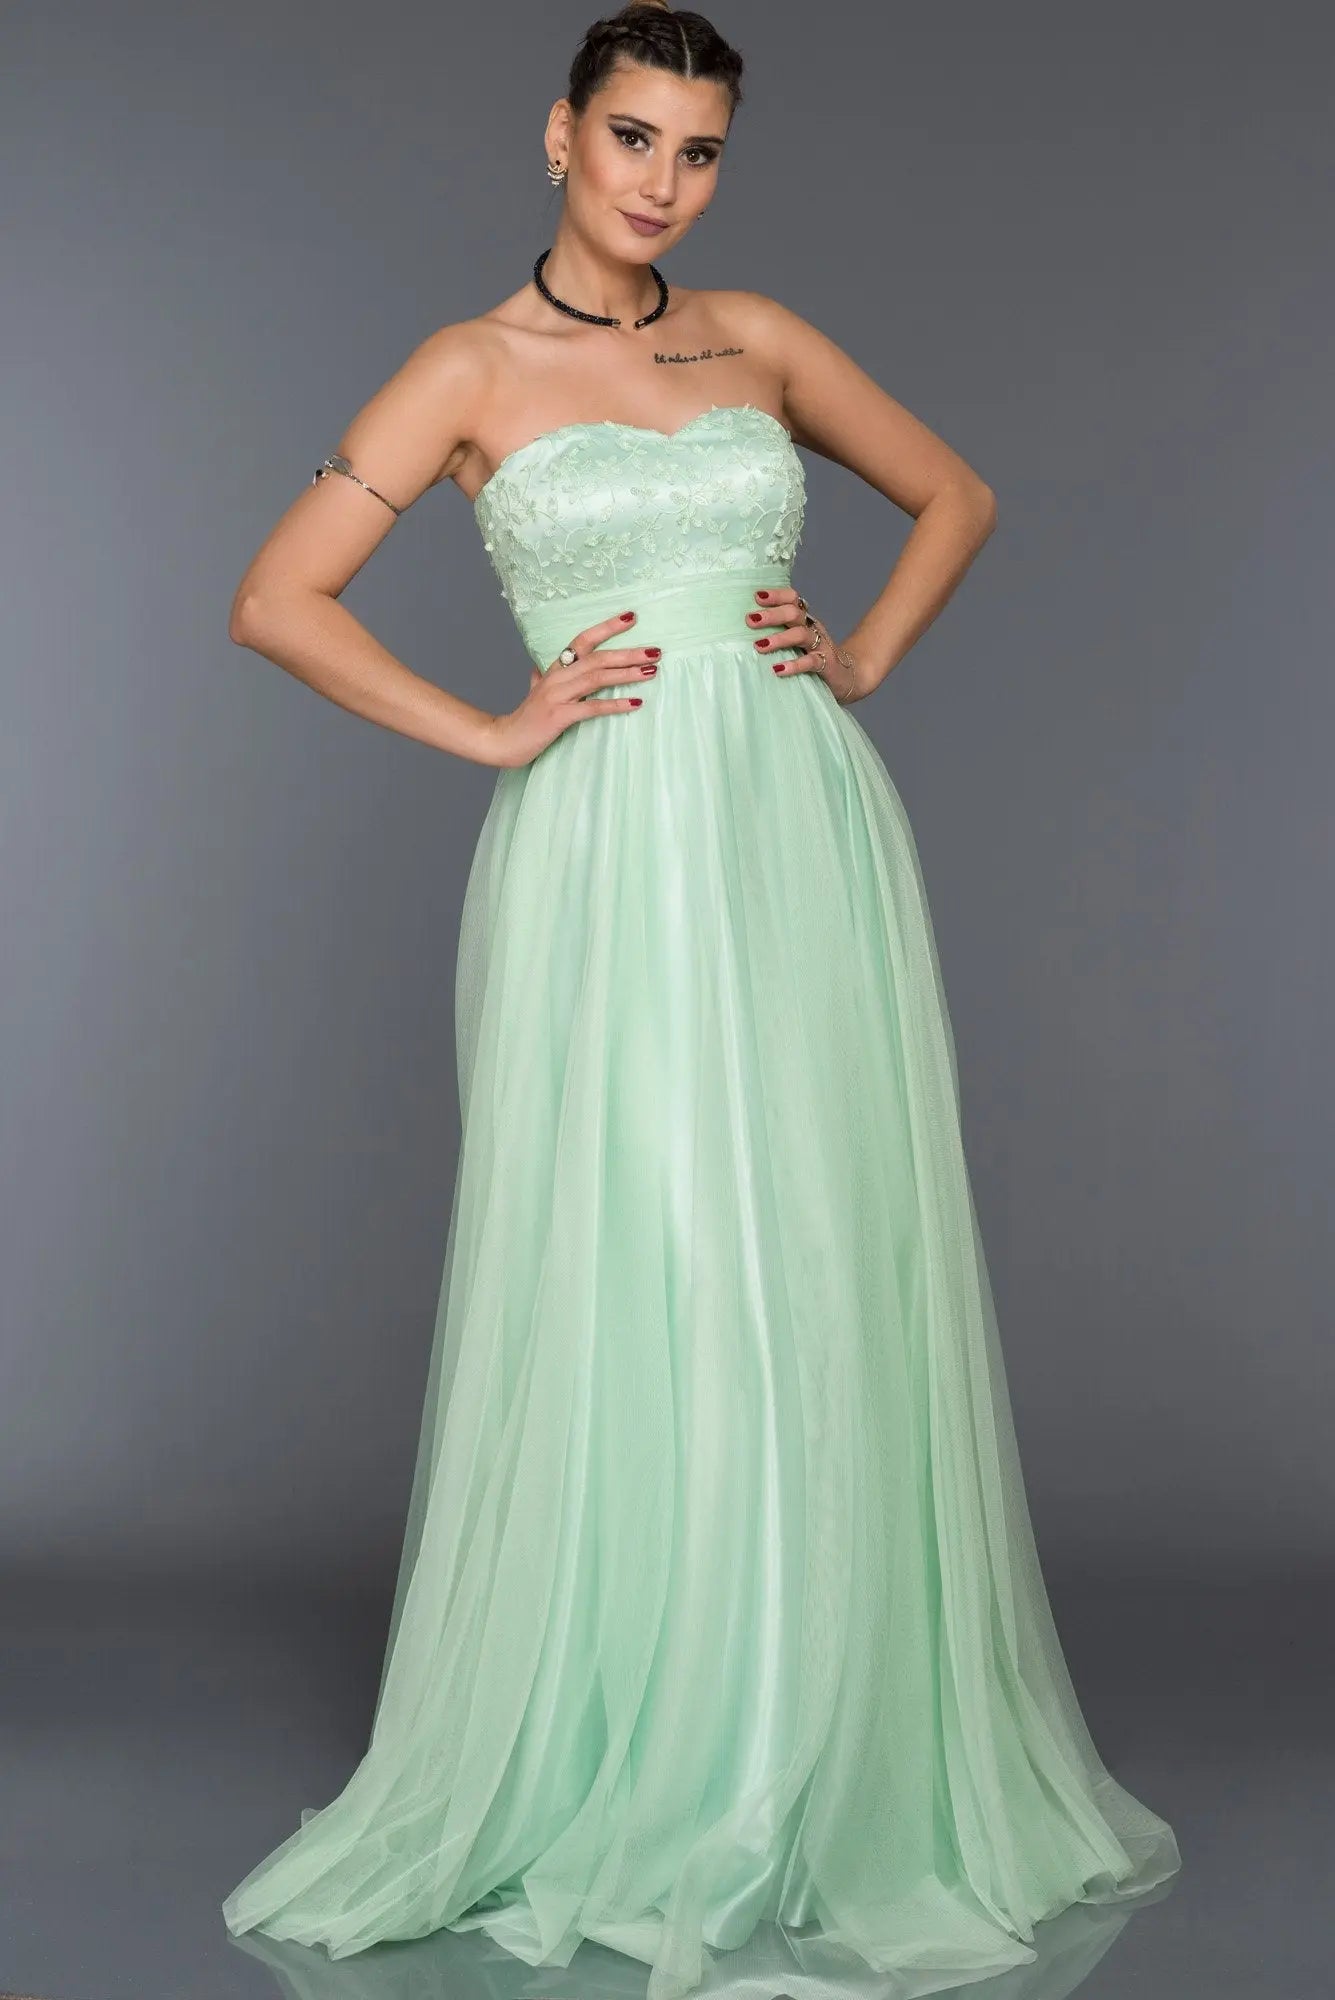 This elegant and stylish Fit & Flare Engagement/Party dress is perfect for any special occasion. The Fit & Flare silhouette is flattering on all body types, and the intricate beading and embroidery add a touch of luxury. The dress is made from high-quality materials and is sure to make you feel like a princess.